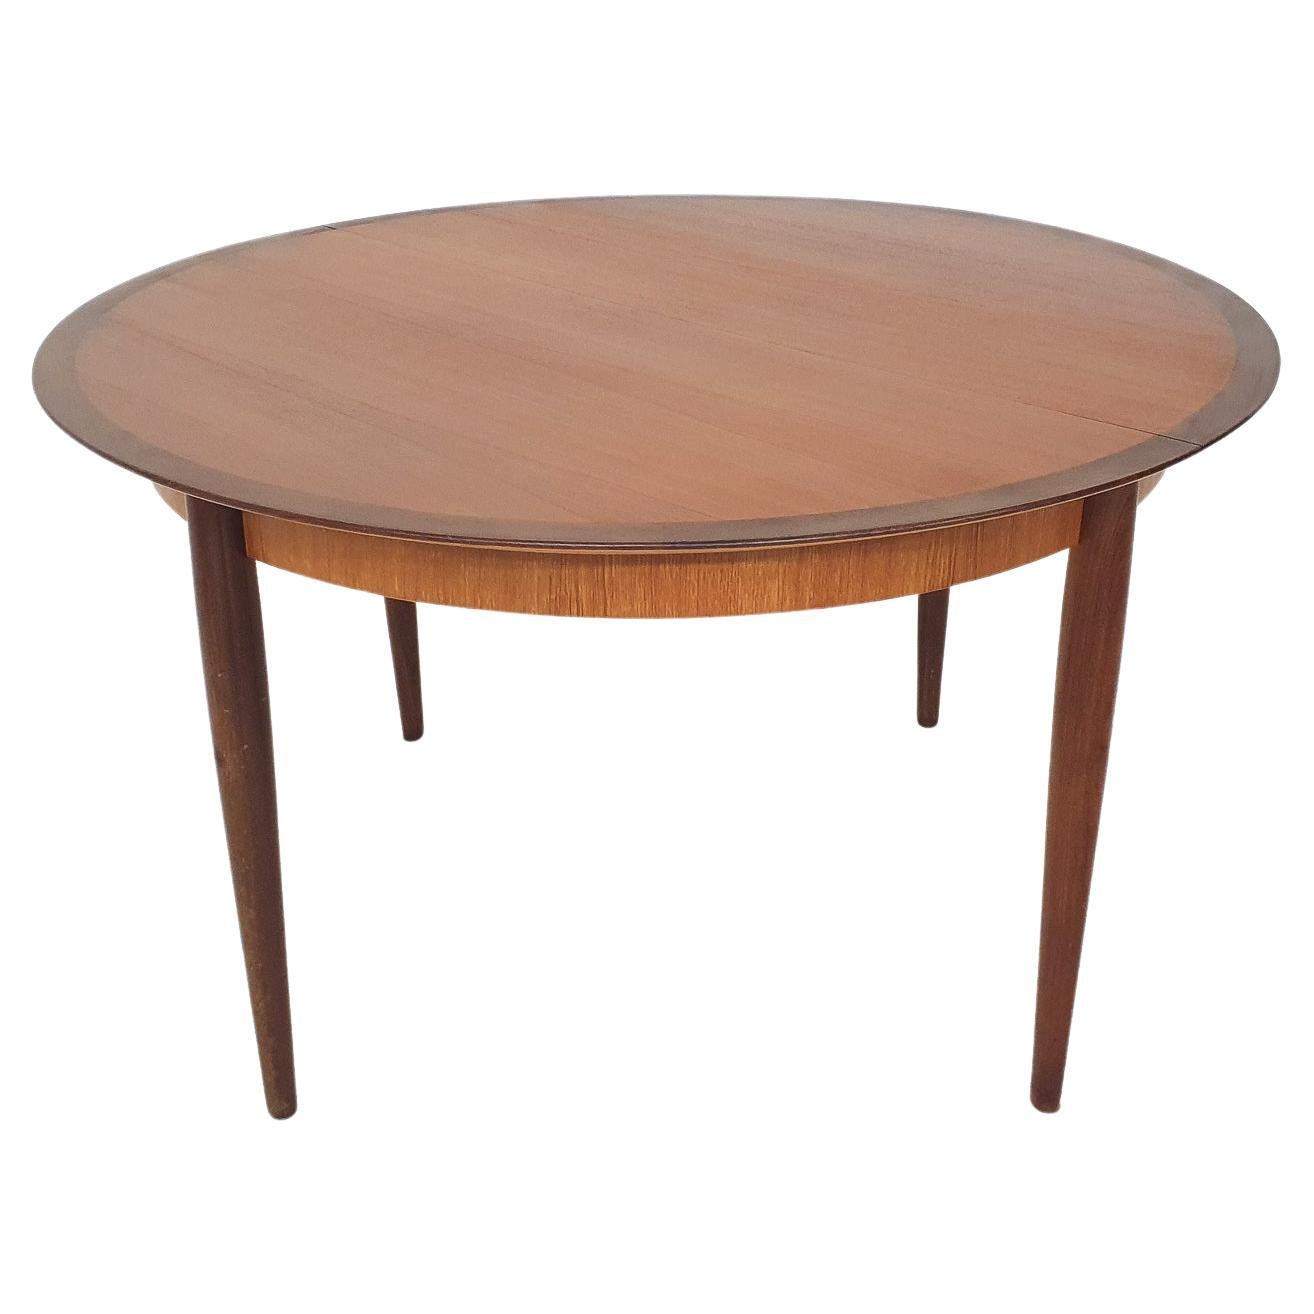 Round Teak Extendable Dining Table by Lubke, Germany, 1960's